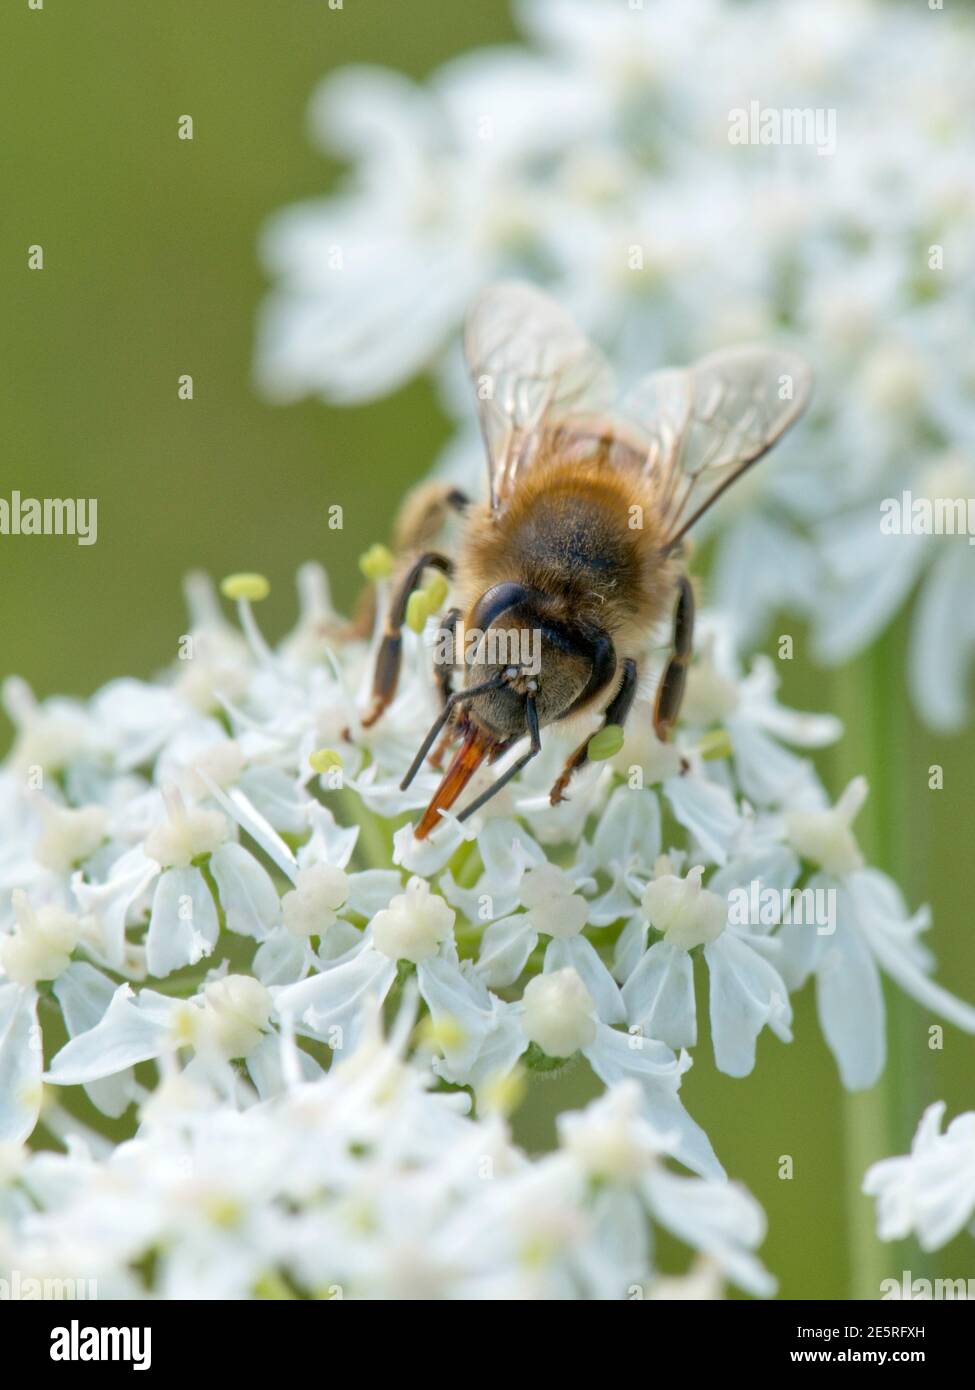 A female drone fly (Eristalis tenax) taking nectar through its proboscis from a hogweed (Heracleum sphondylium) flower, June Stock Photo